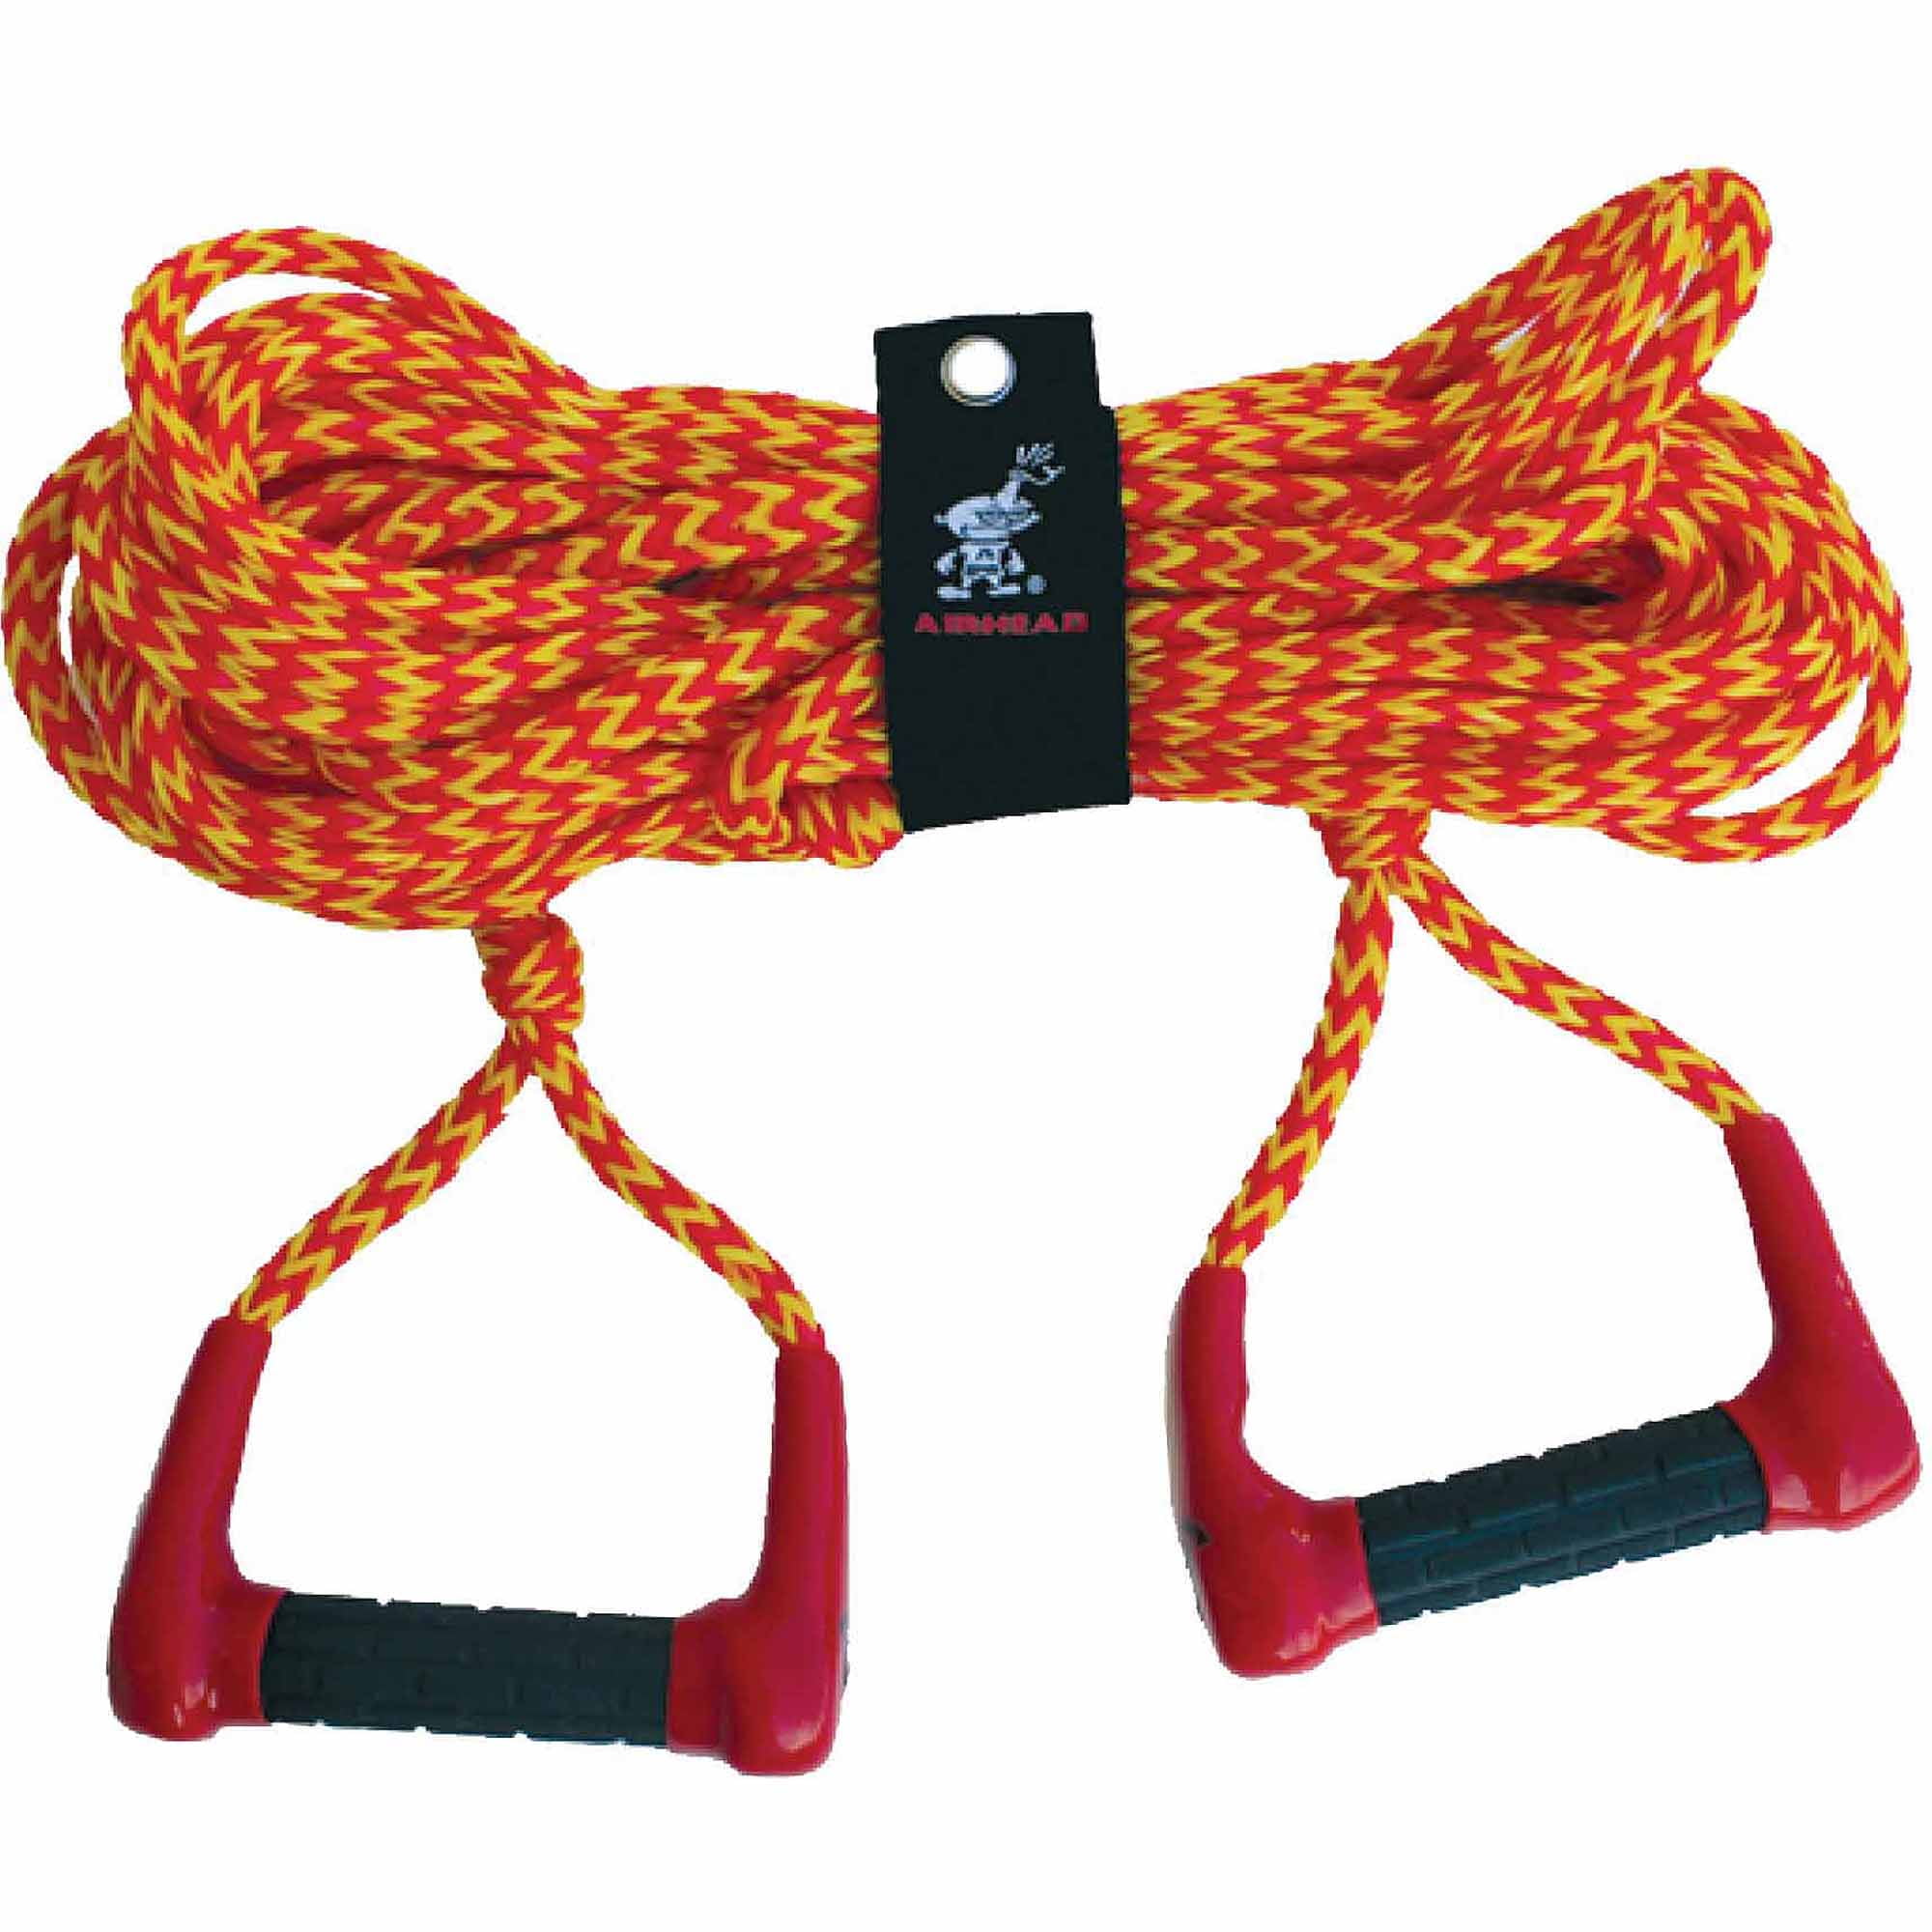 Ski Ropes with regard to Elegant in addition to Lovely how to ski a rope intended for The house